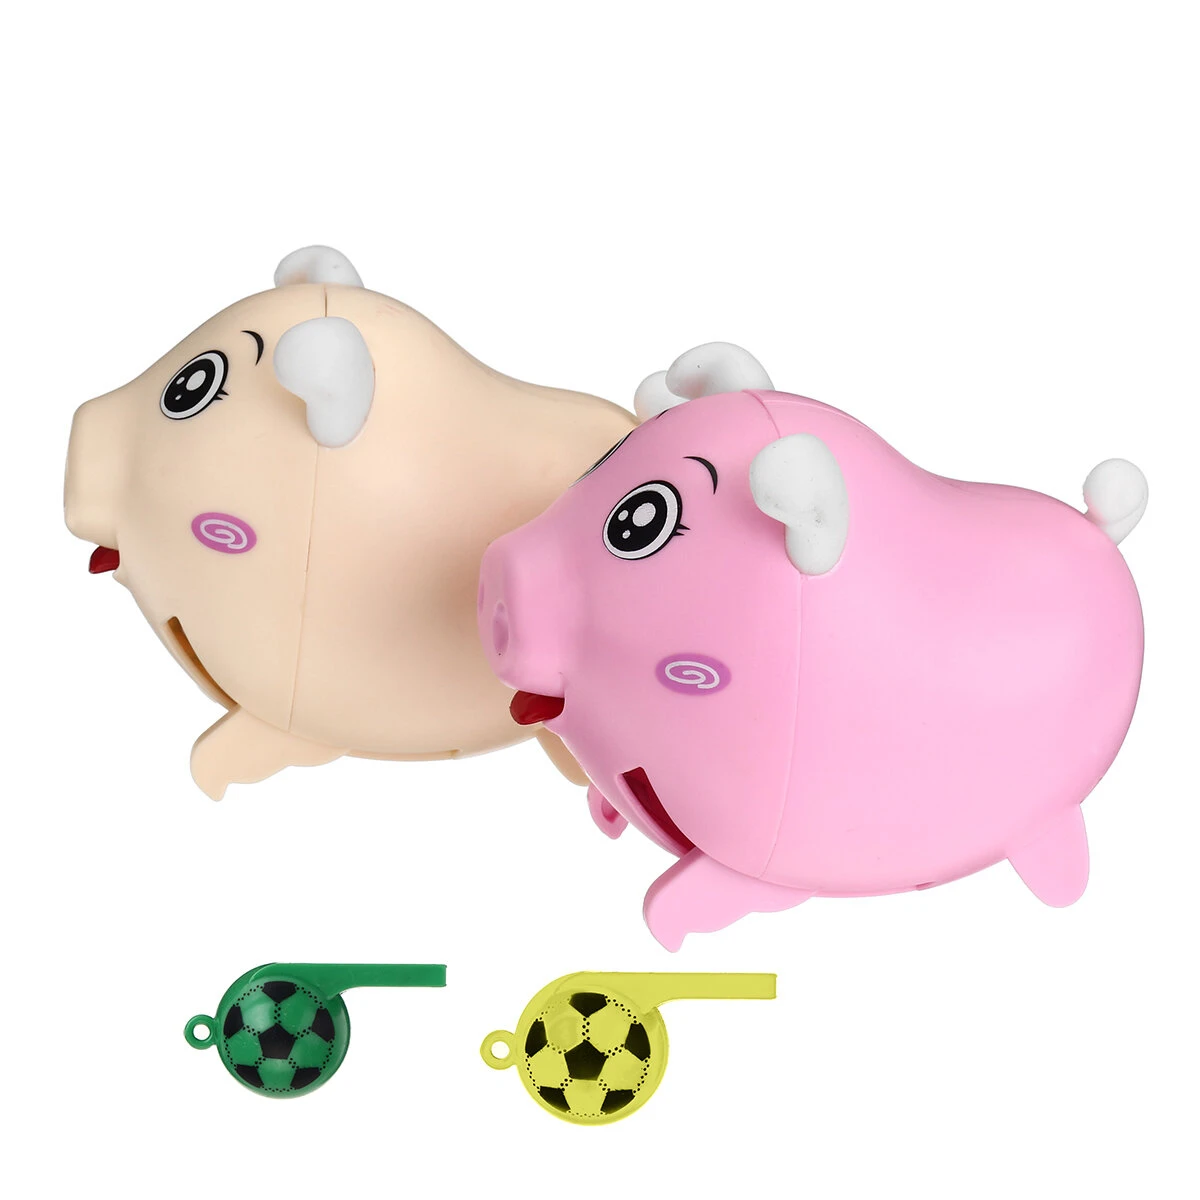 Kids toys animals sound induction whistling pig electronic pig interactive walking electronic toy